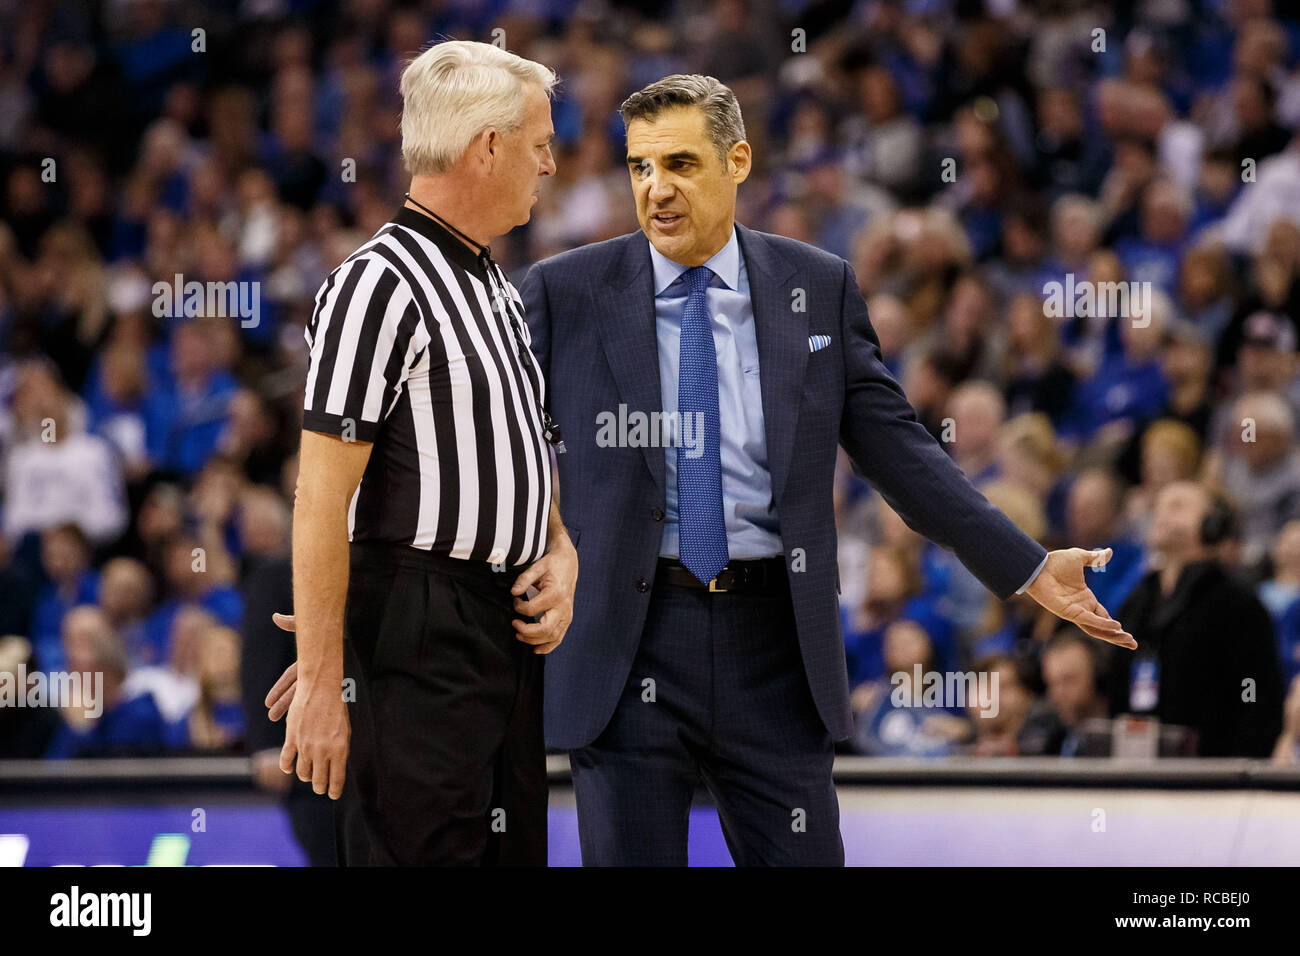 Omaha, NE . 13th Jan, 2019. Villanova Wildcats head coach Jay Wright  speaks game official Brian O'Connell in action during an NCAA men's  basketball game between the Villanova Wildcats and Creighton Bluejays